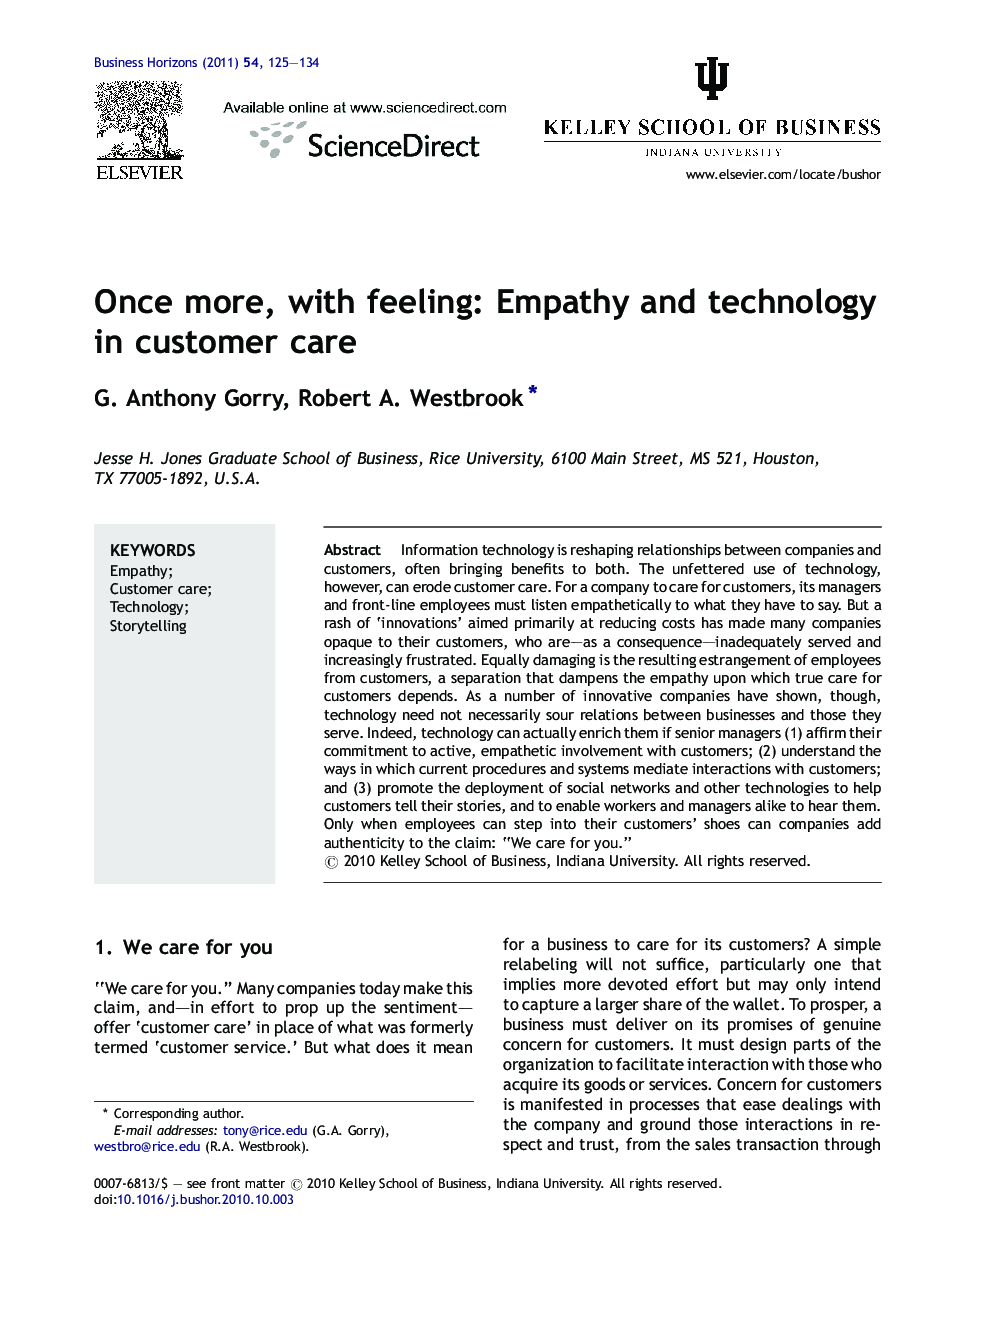 Once more, with feeling: Empathy and technology in customer care